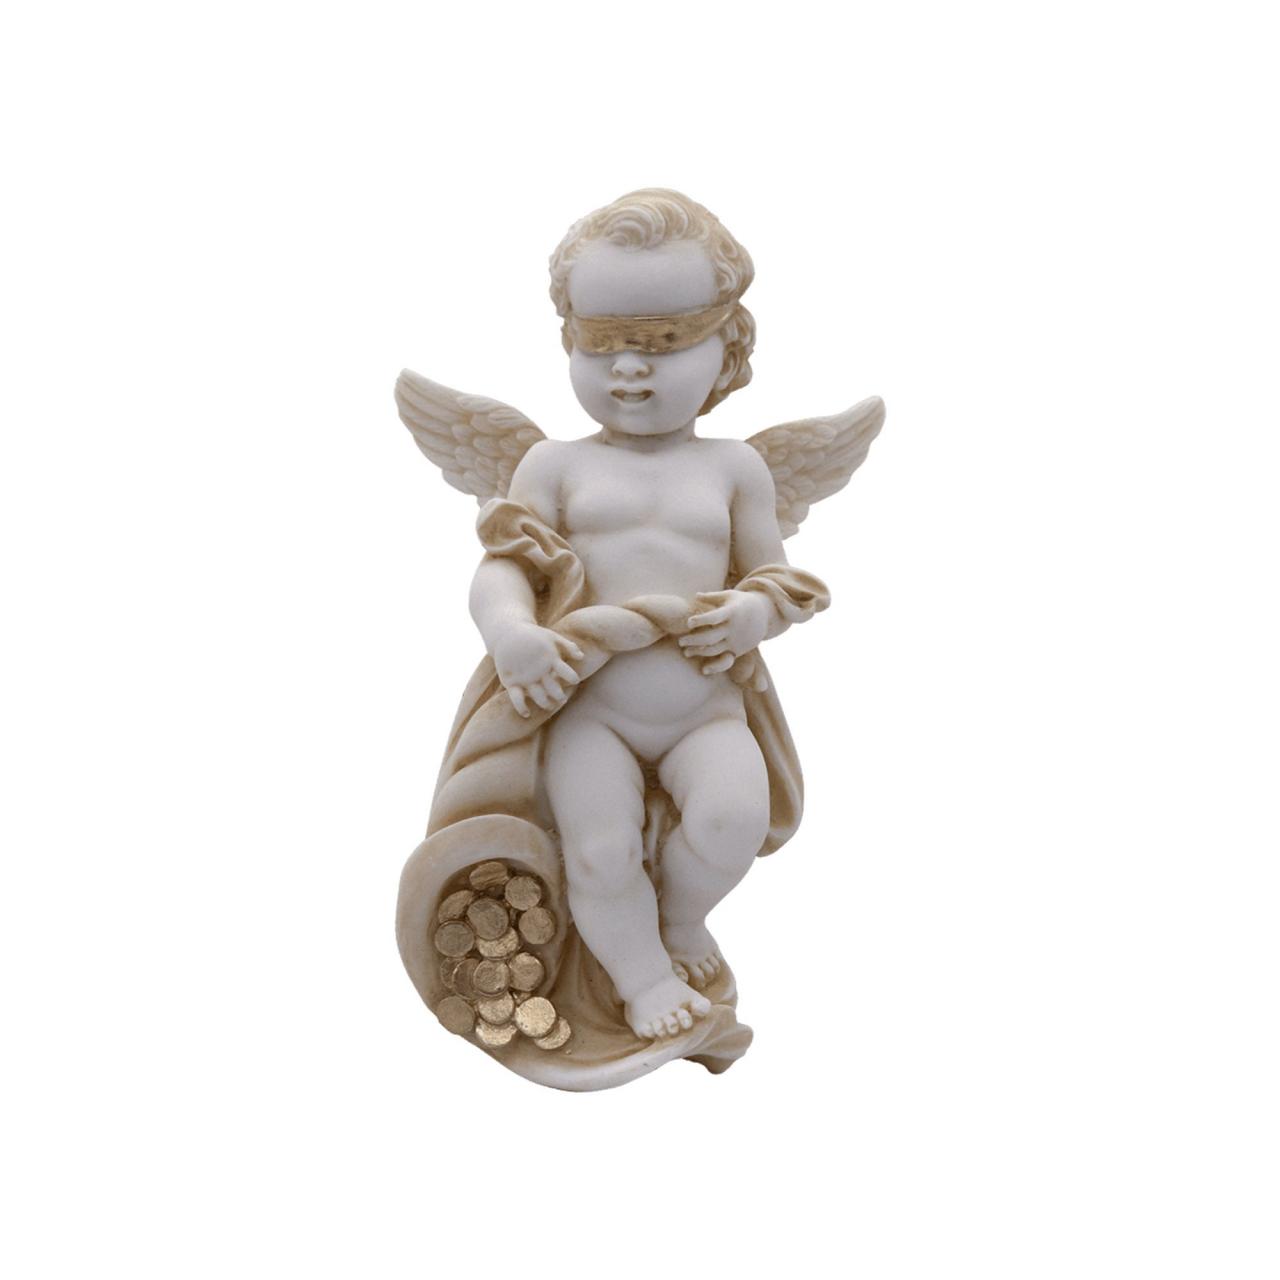 Baby Angel Statue With Lucky Coins - Handmade Greek Alabaster Statue 16cm - 6.30"